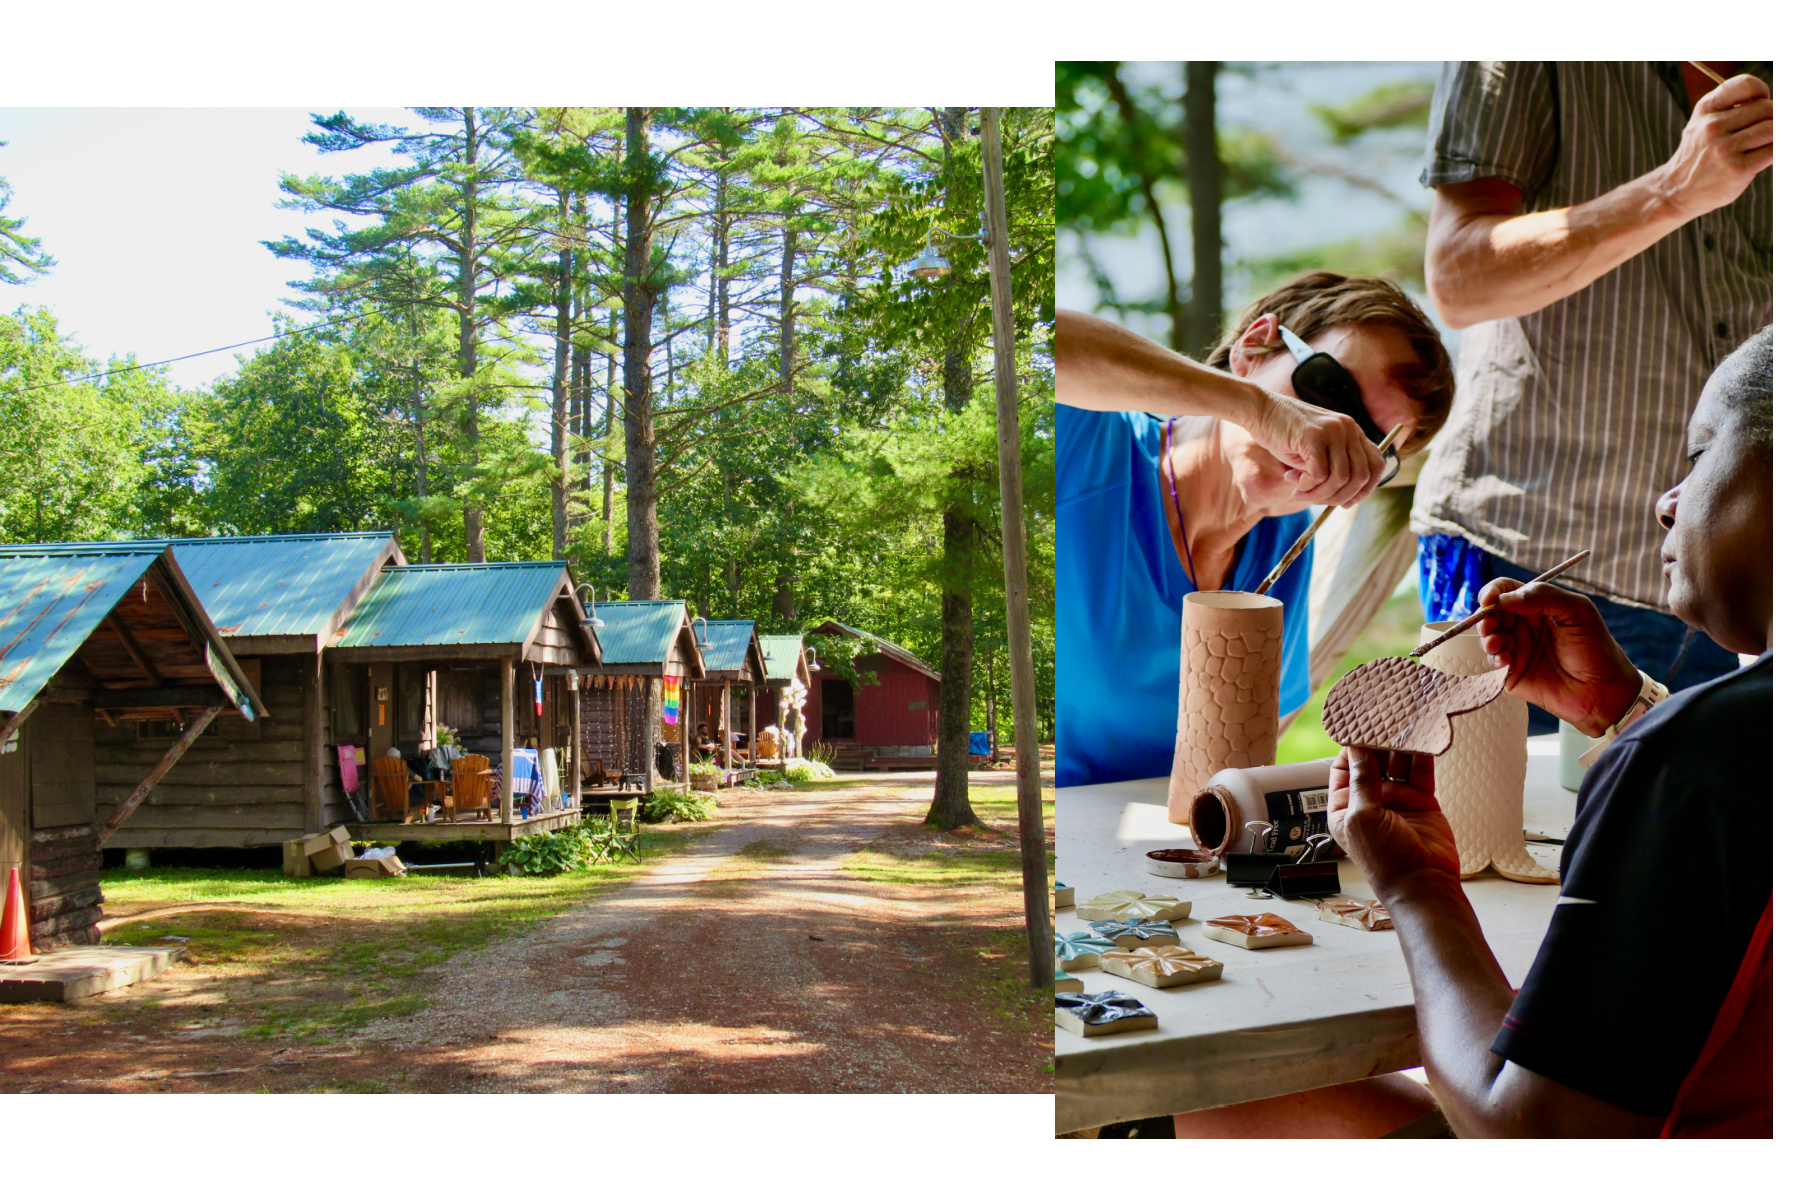 Images of cabins decorated with pride flags at Camp Camp and of people painting pottery.